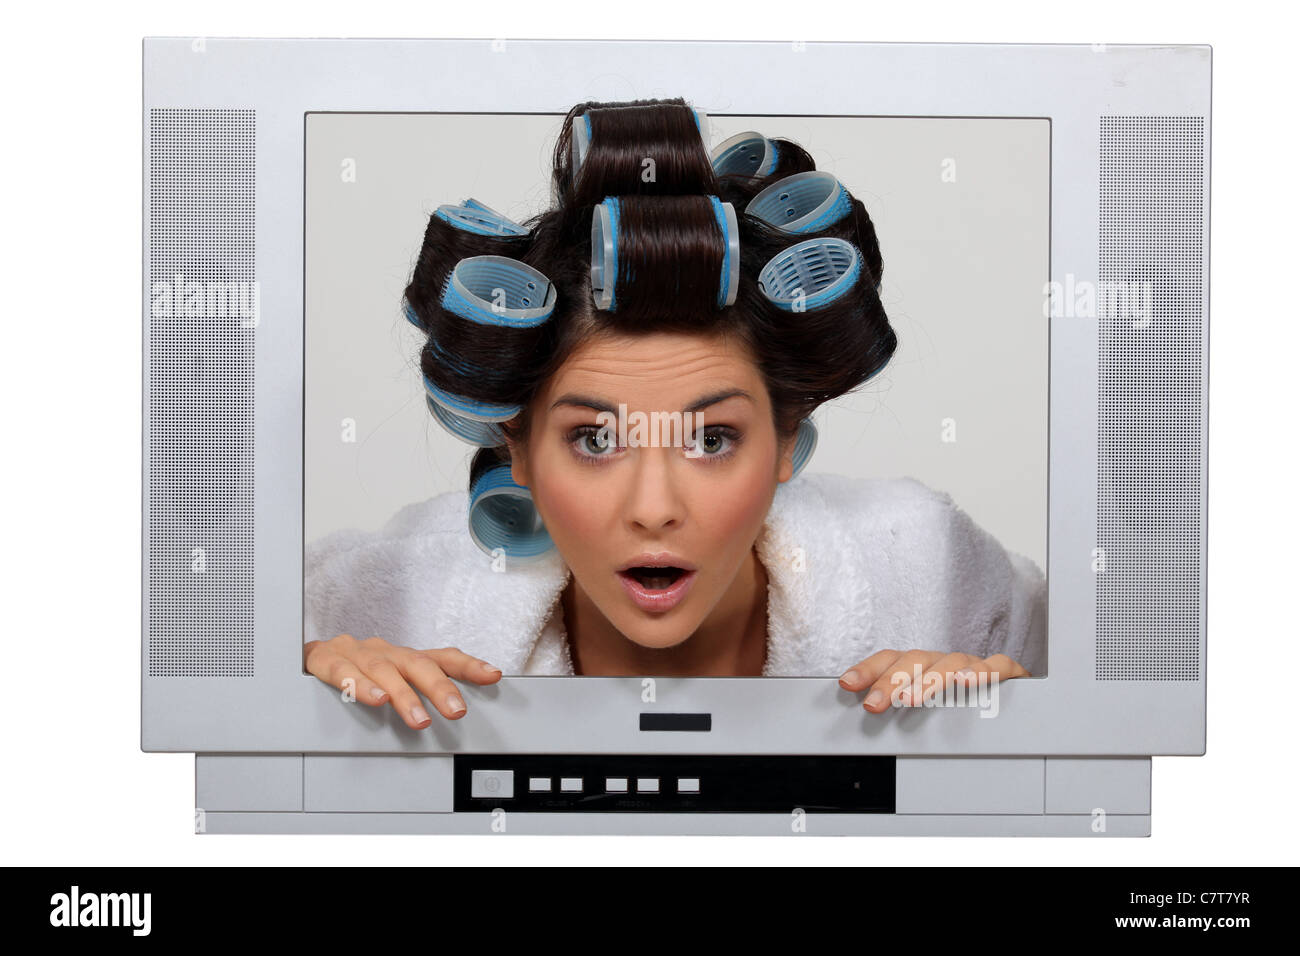 woman in tv set with hair curlers Stock Photo